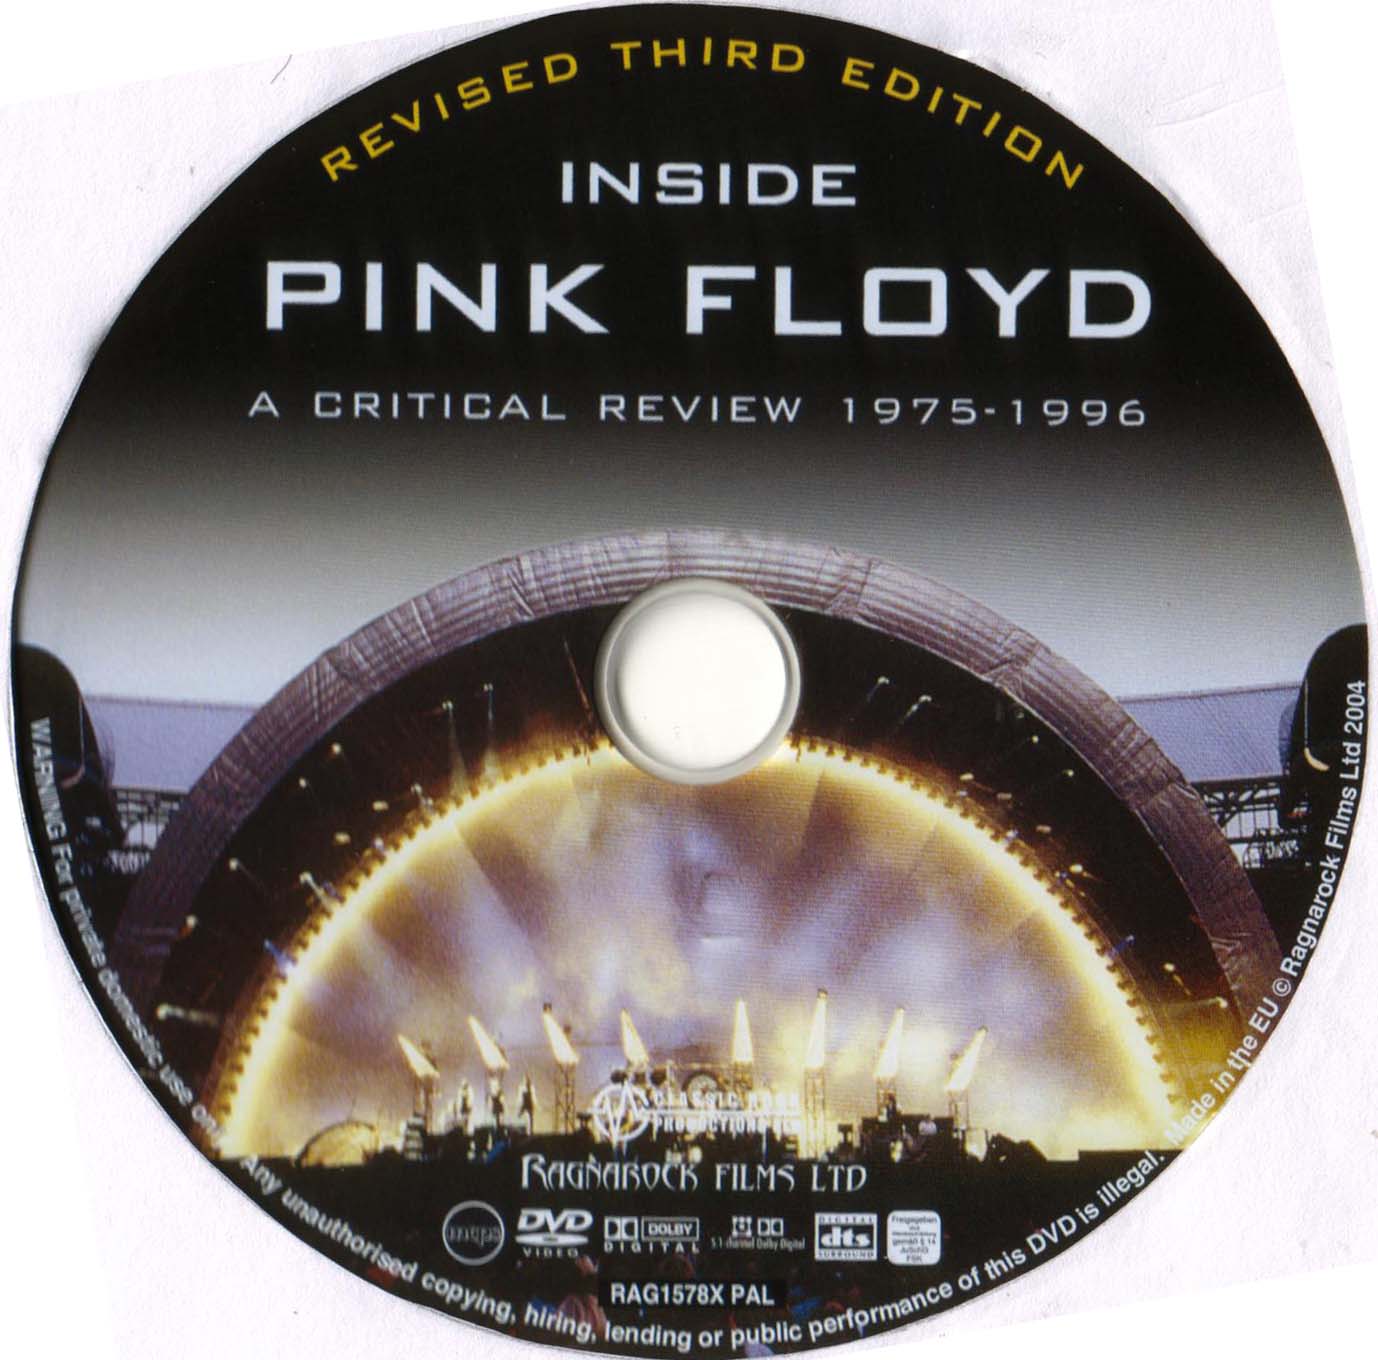 Inside Pink Floyd A Critical Review 1975-1996